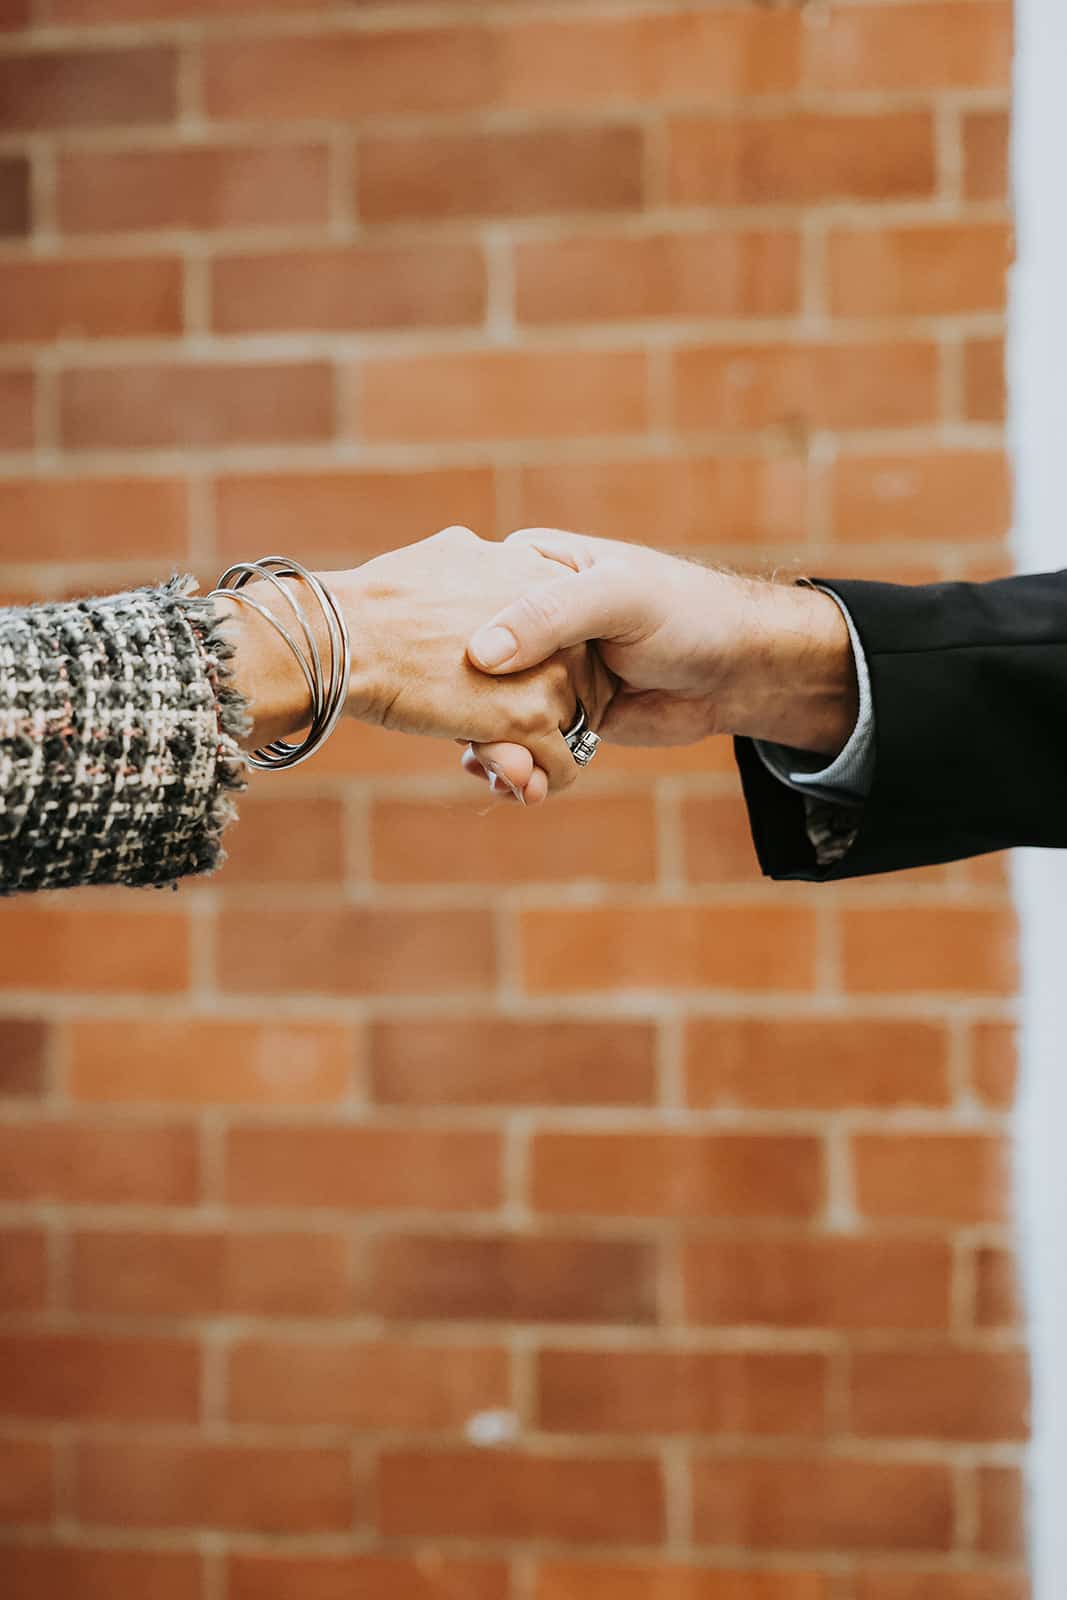 A handshake between a man and woman who is wearing silver bracelets